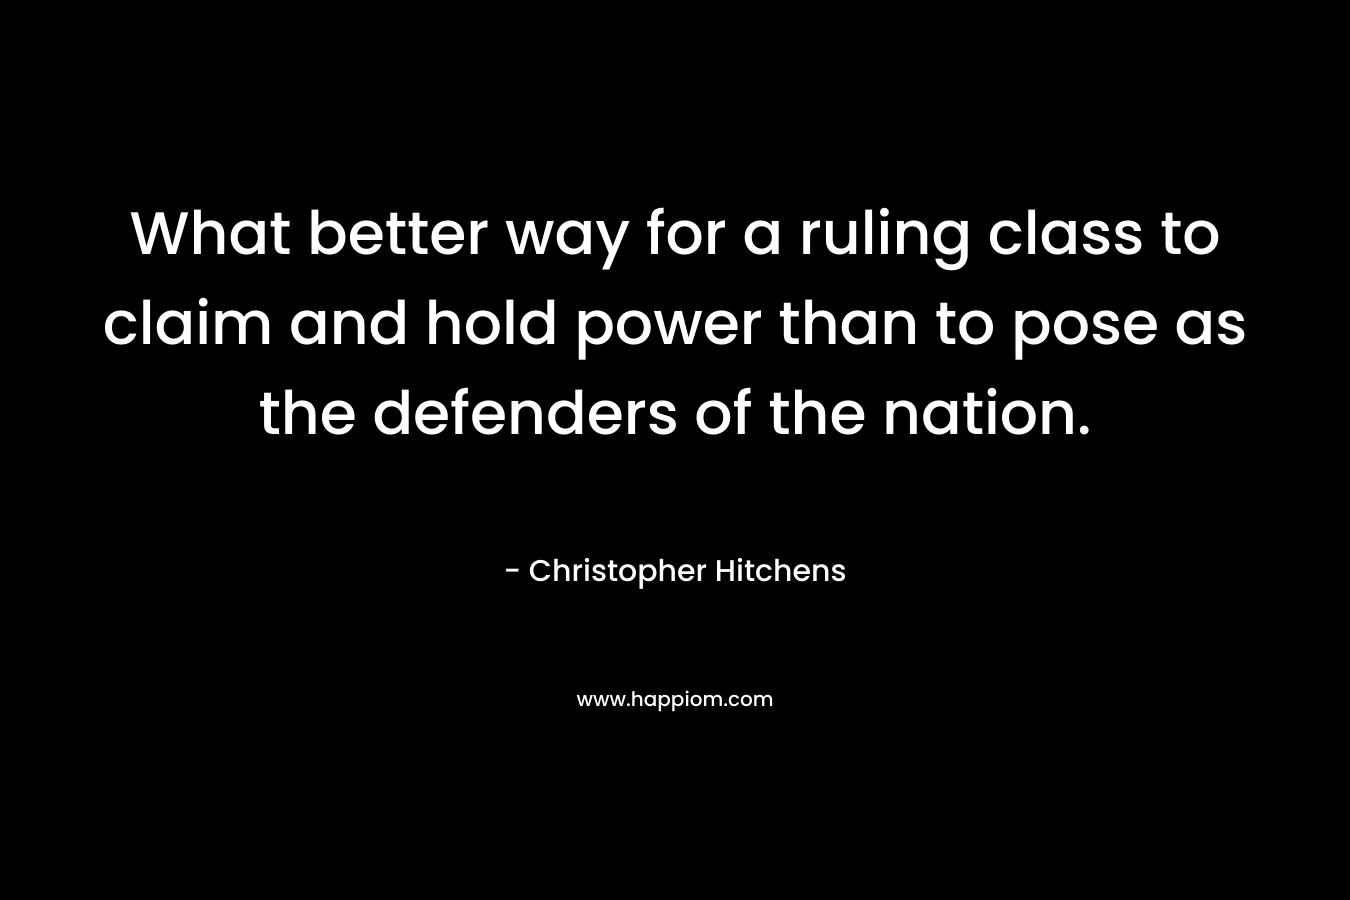 What better way for a ruling class to claim and hold power than to pose as the defenders of the nation. – Christopher Hitchens